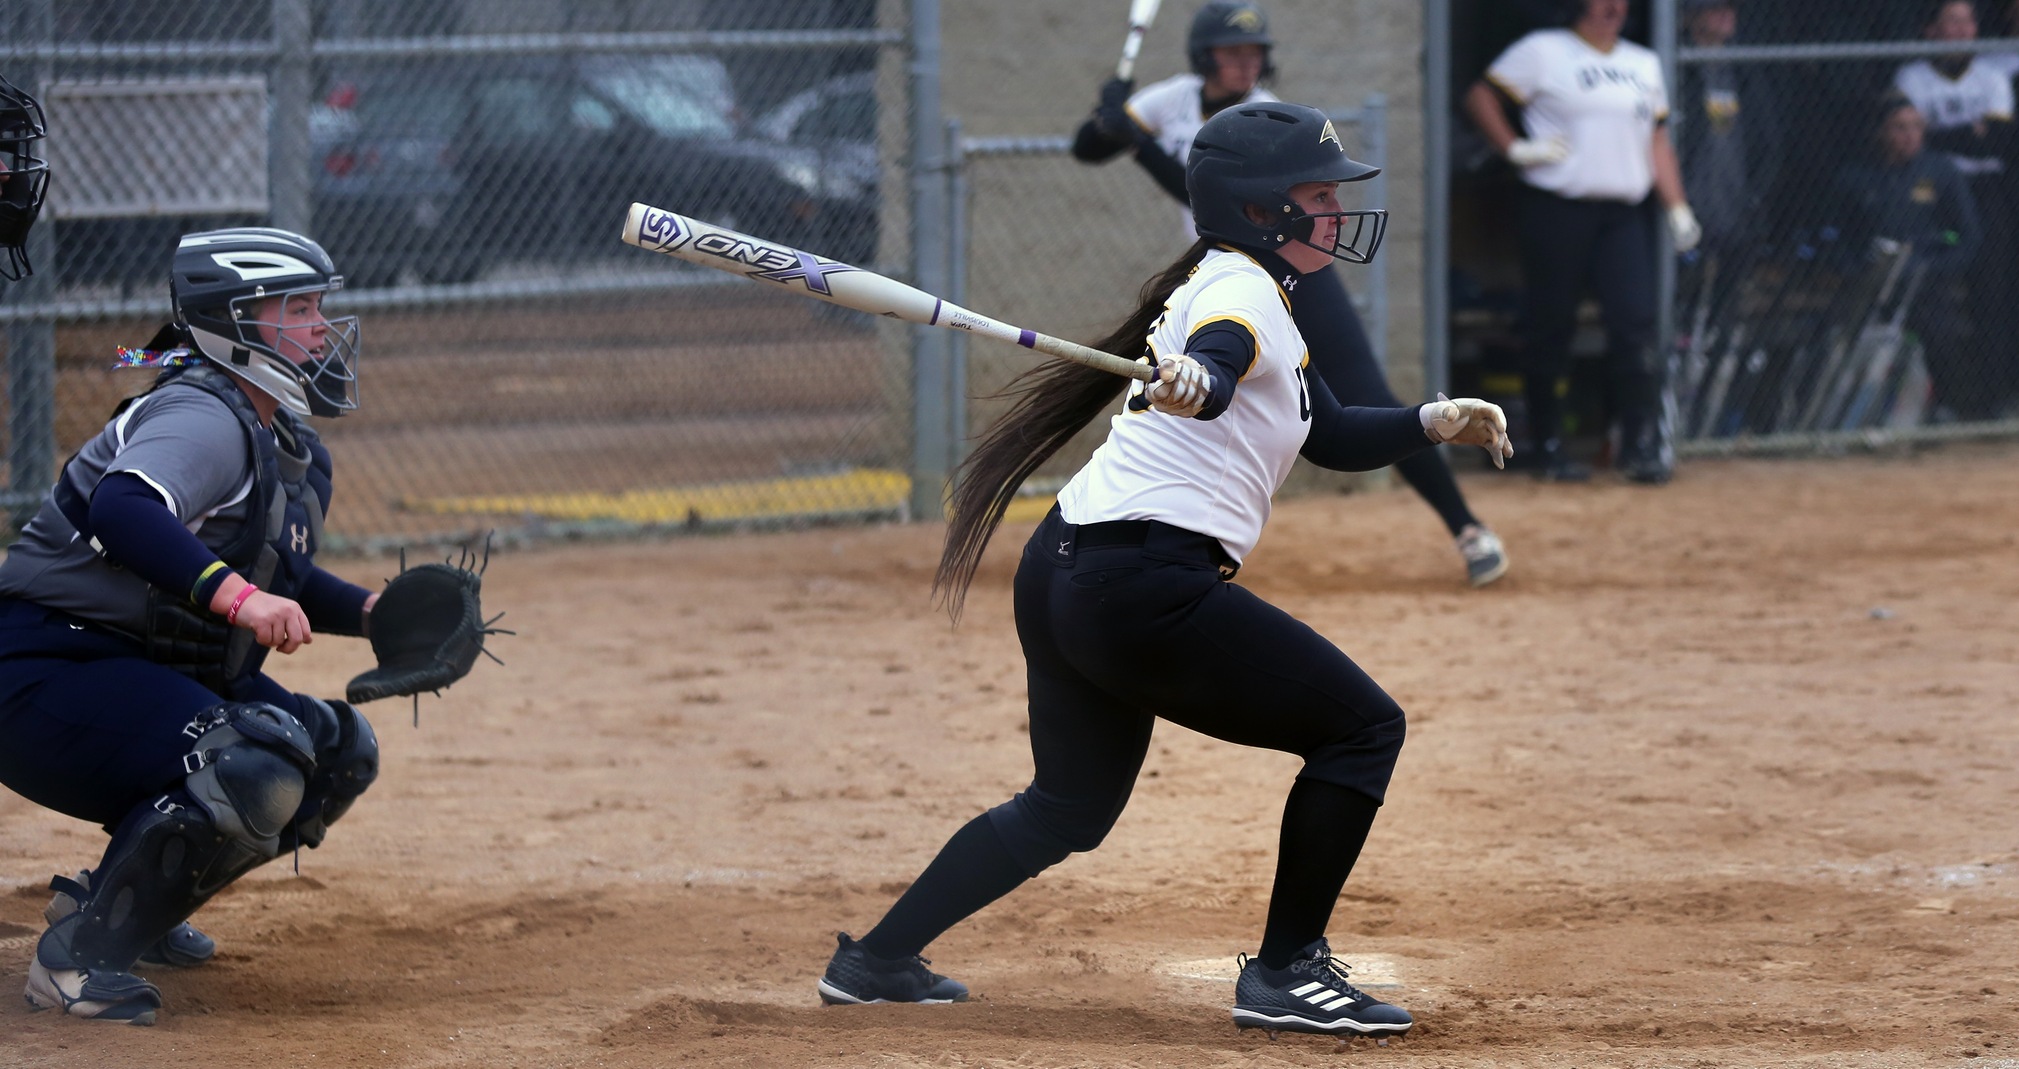 Acacia Tupa went 5-for-7 with two doubles, one home run, three runs scored and four runs batted in against the Eagles.